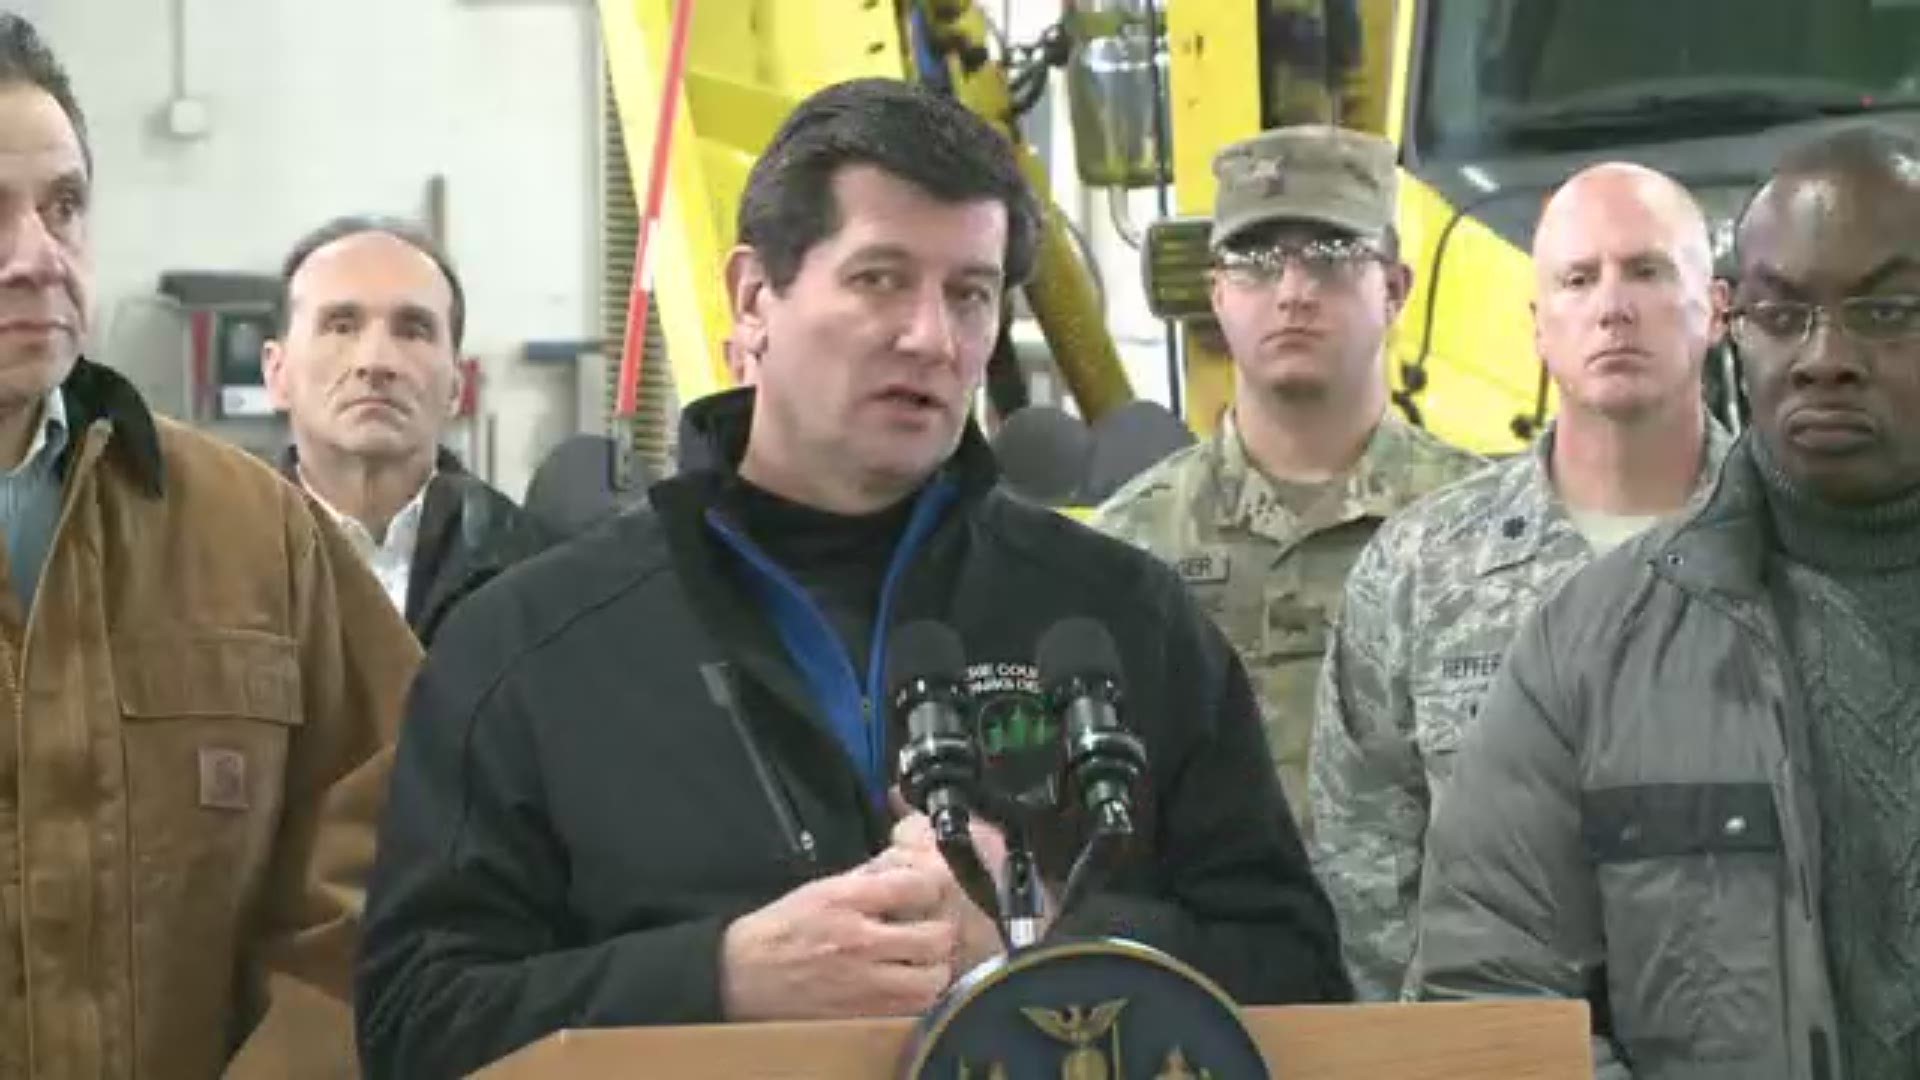 Governor Cuomo in town ahead of winter storm expected for WNY